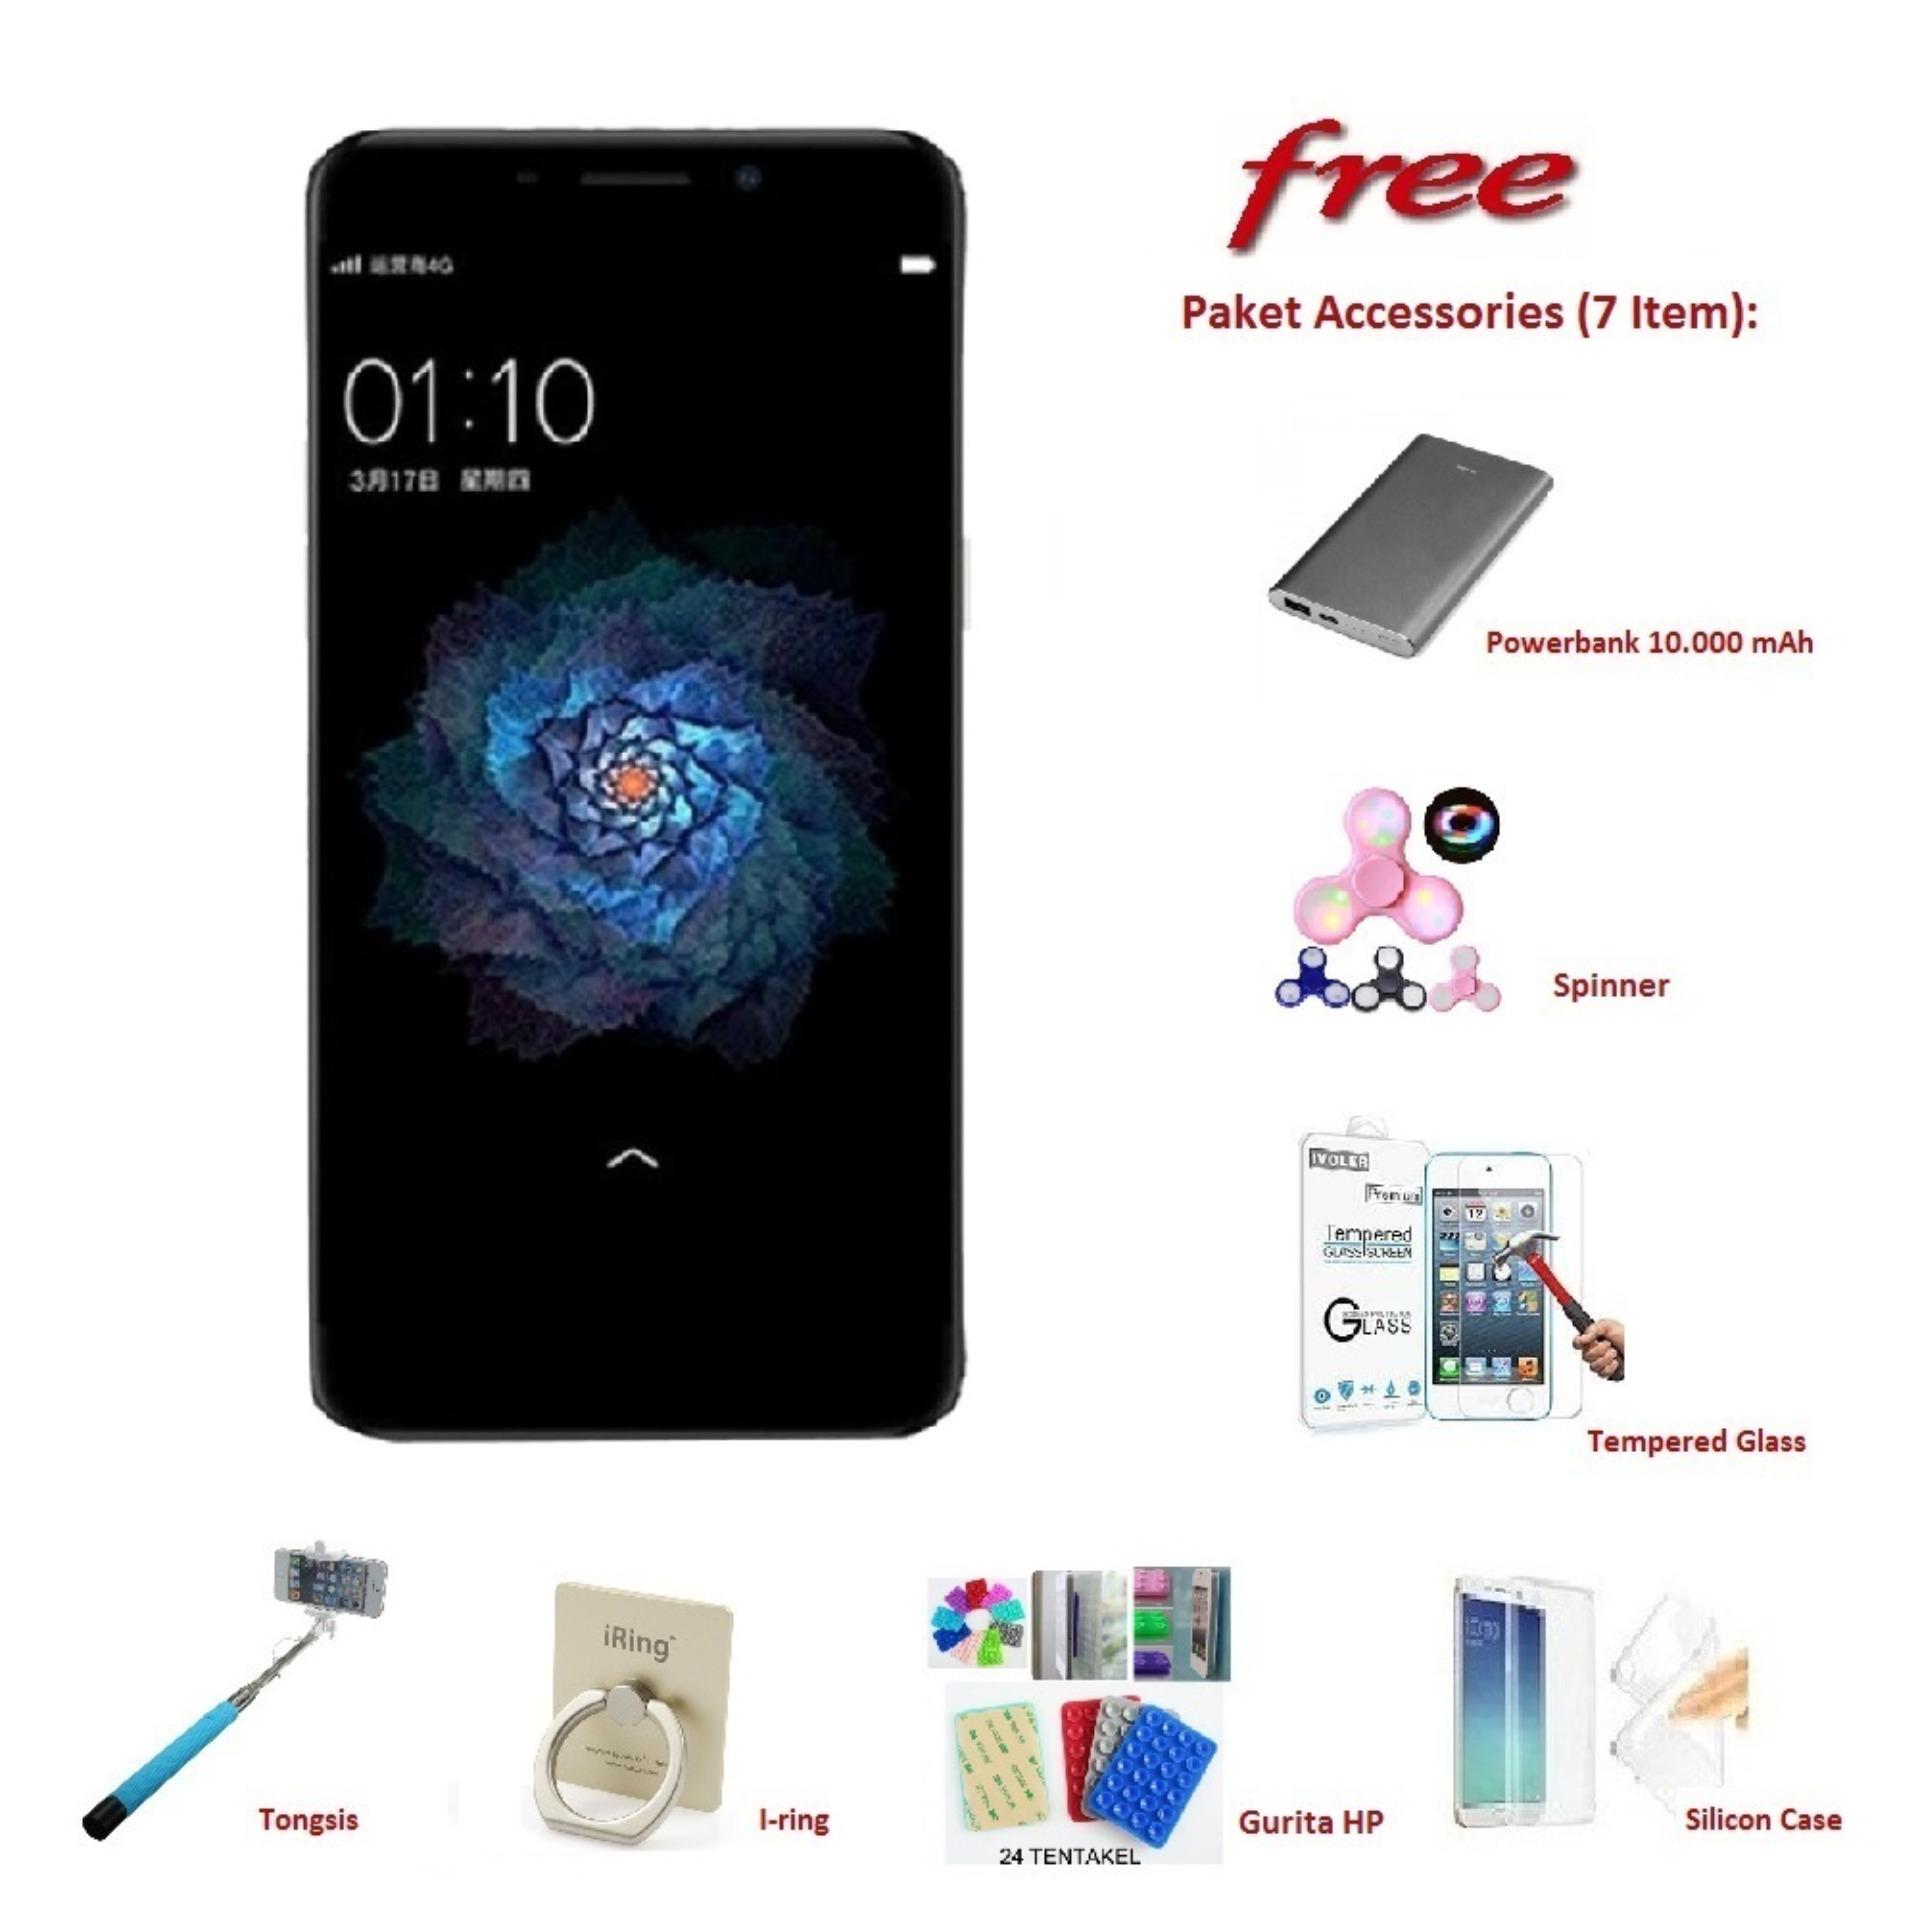 OPPO A37 [2/16GB] + Free 7 Item Accessories